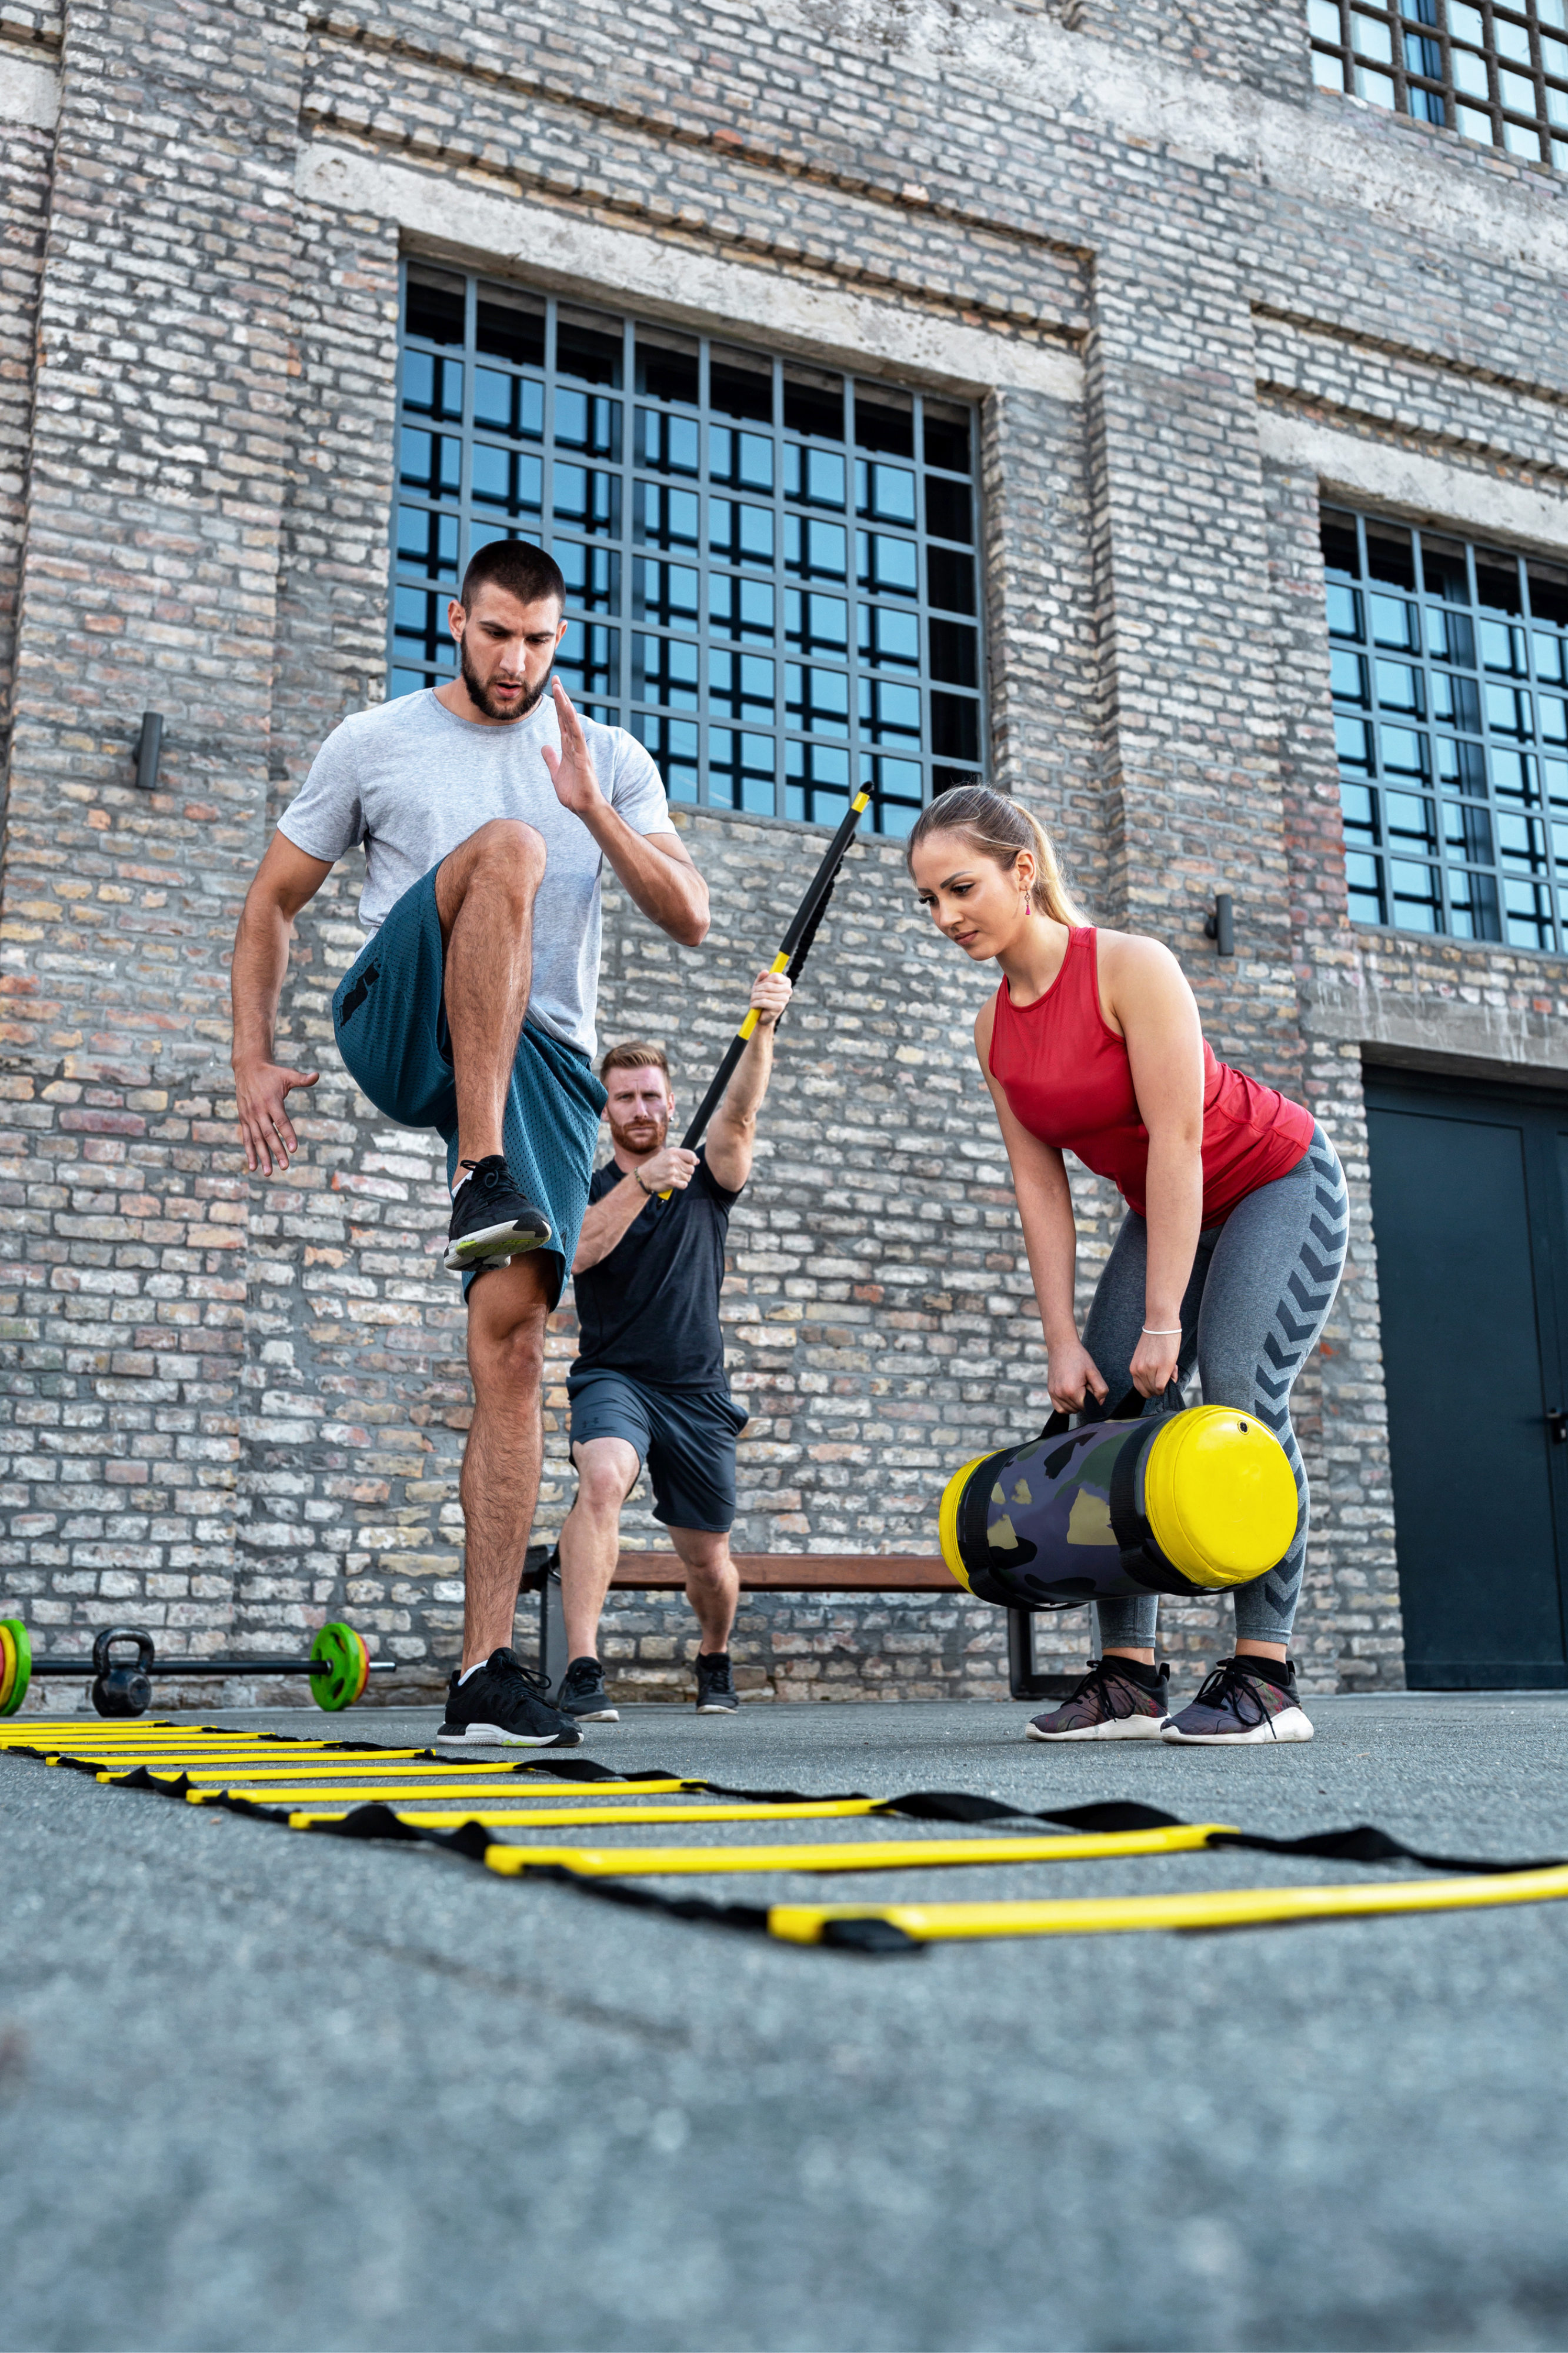 Two people working out, one on an agility ladder and one with weights